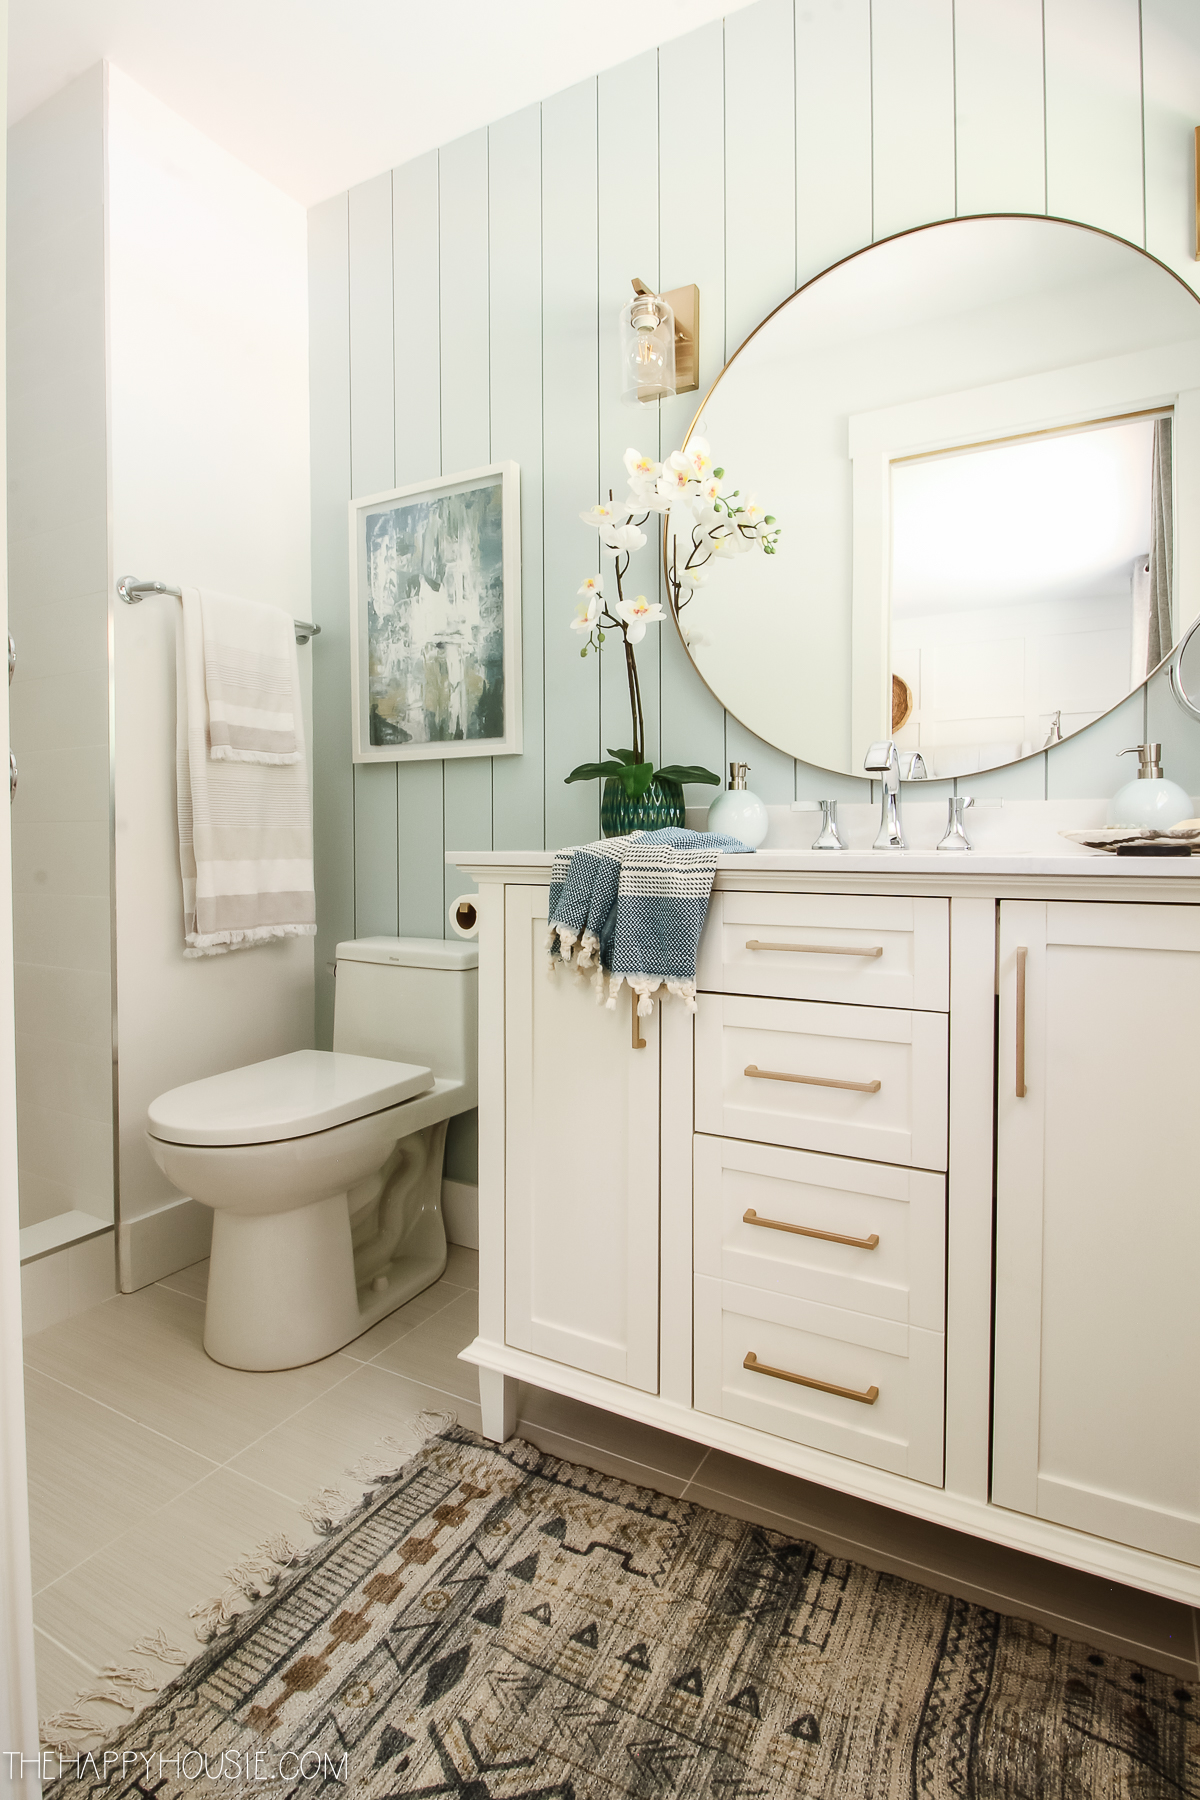 The ensuite with shiplap and a round mirror.